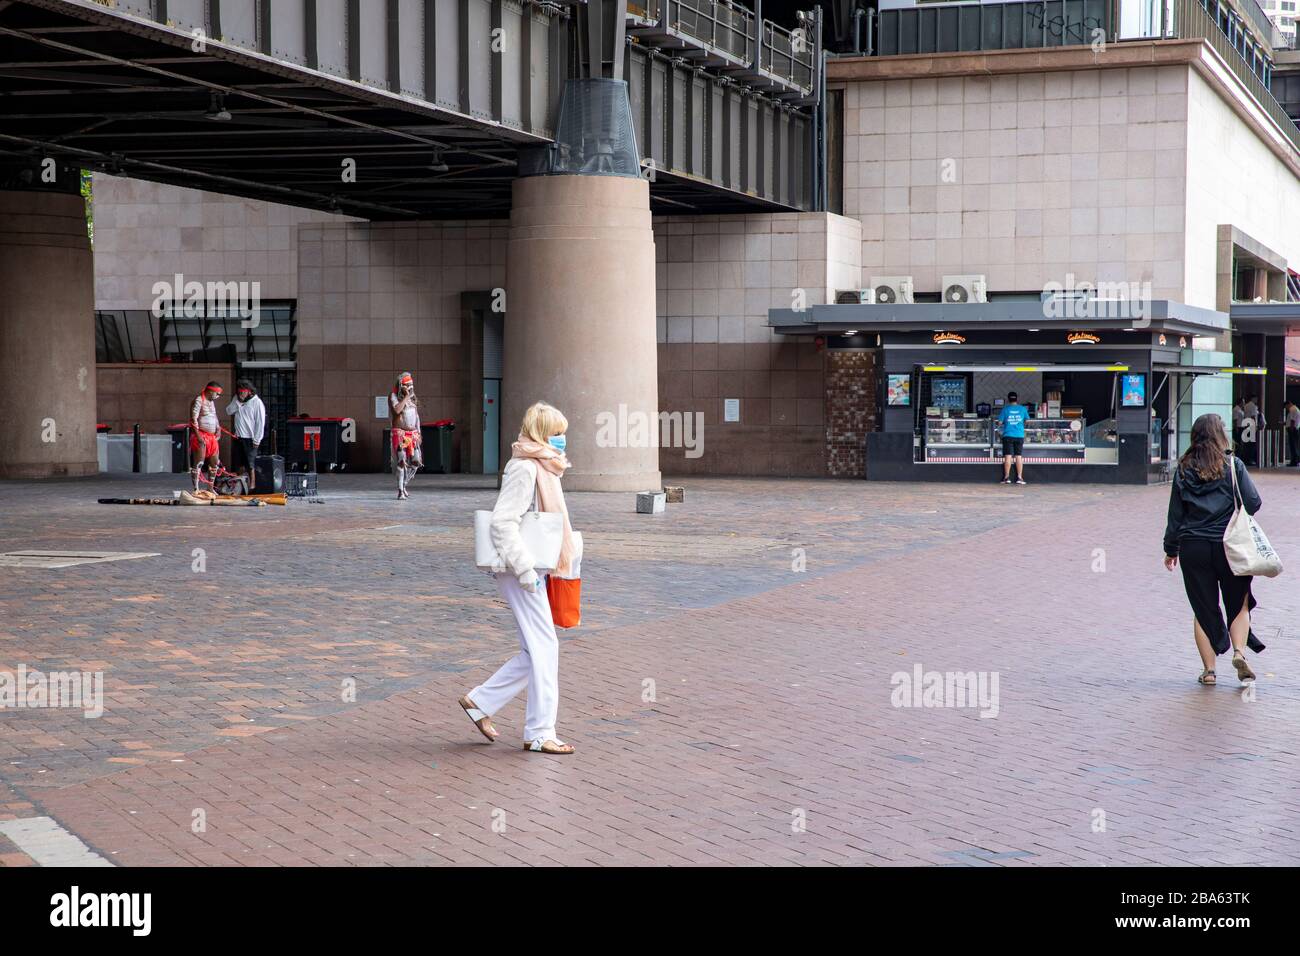 Coronavirus Sydney, elderly woman at circular quay wearing face mask as protection against the disease Stock Photo